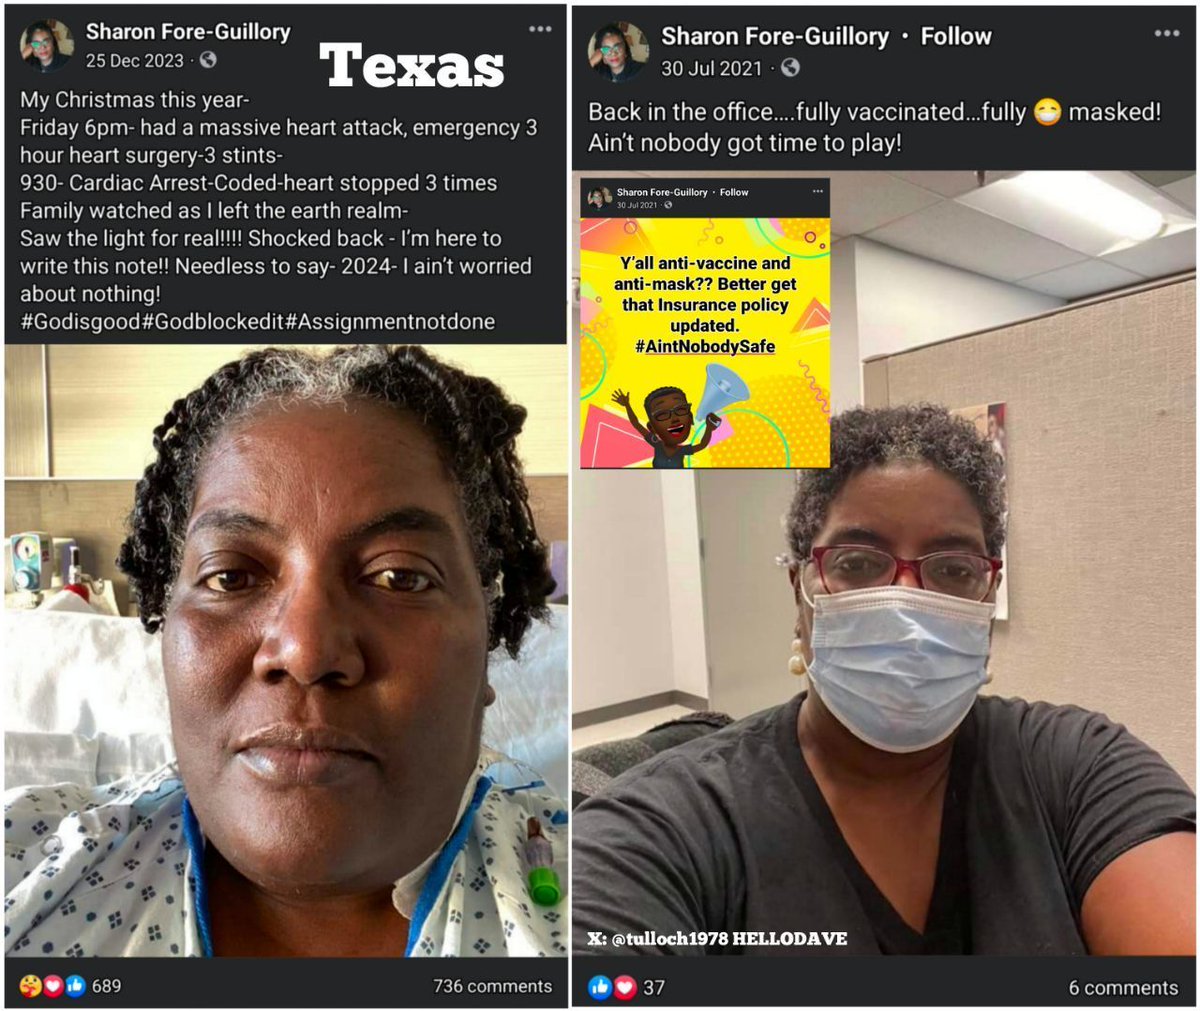 Texas - Sharon Fore-Guillory July 30, 2021: 'Y'all anti-vaccine and anti-mask?? Better get that insurance policy updated' 'Back in the office...fully vaccinated...fully masked!' Dec.2023: 'had a massive heart attack...family watched as I left the earth realm...saw the light…